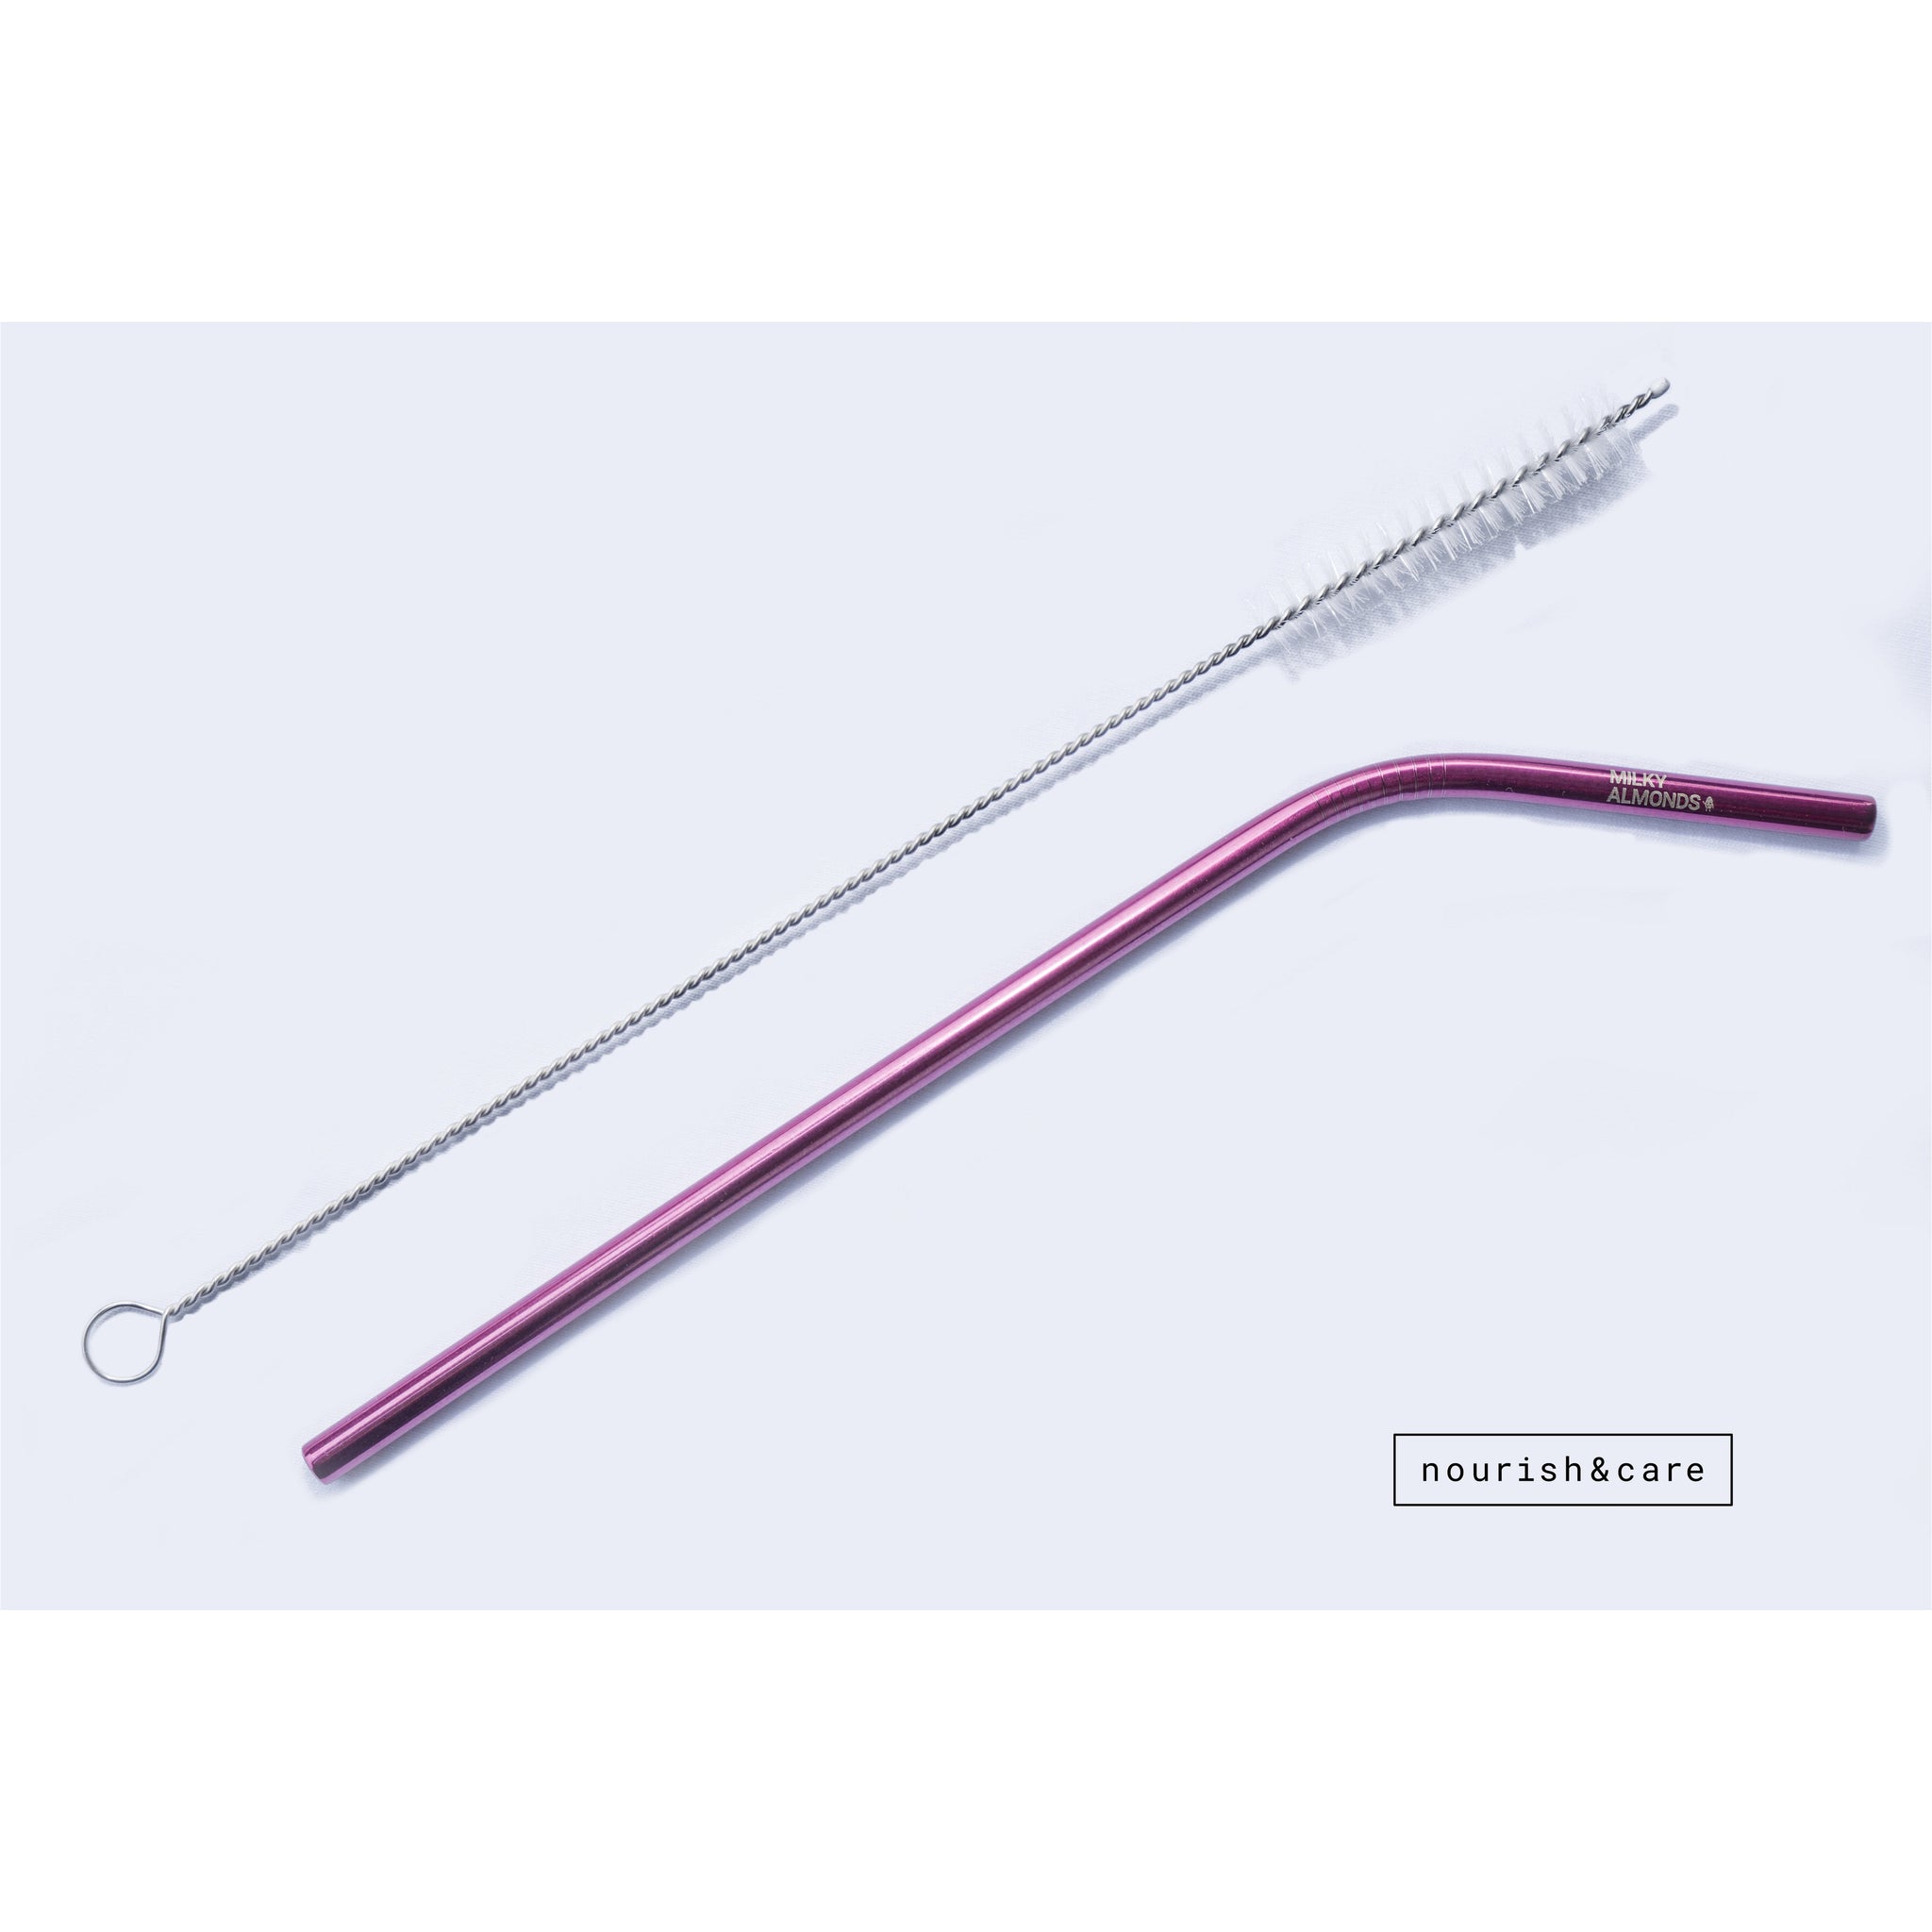 Stainless steel straw